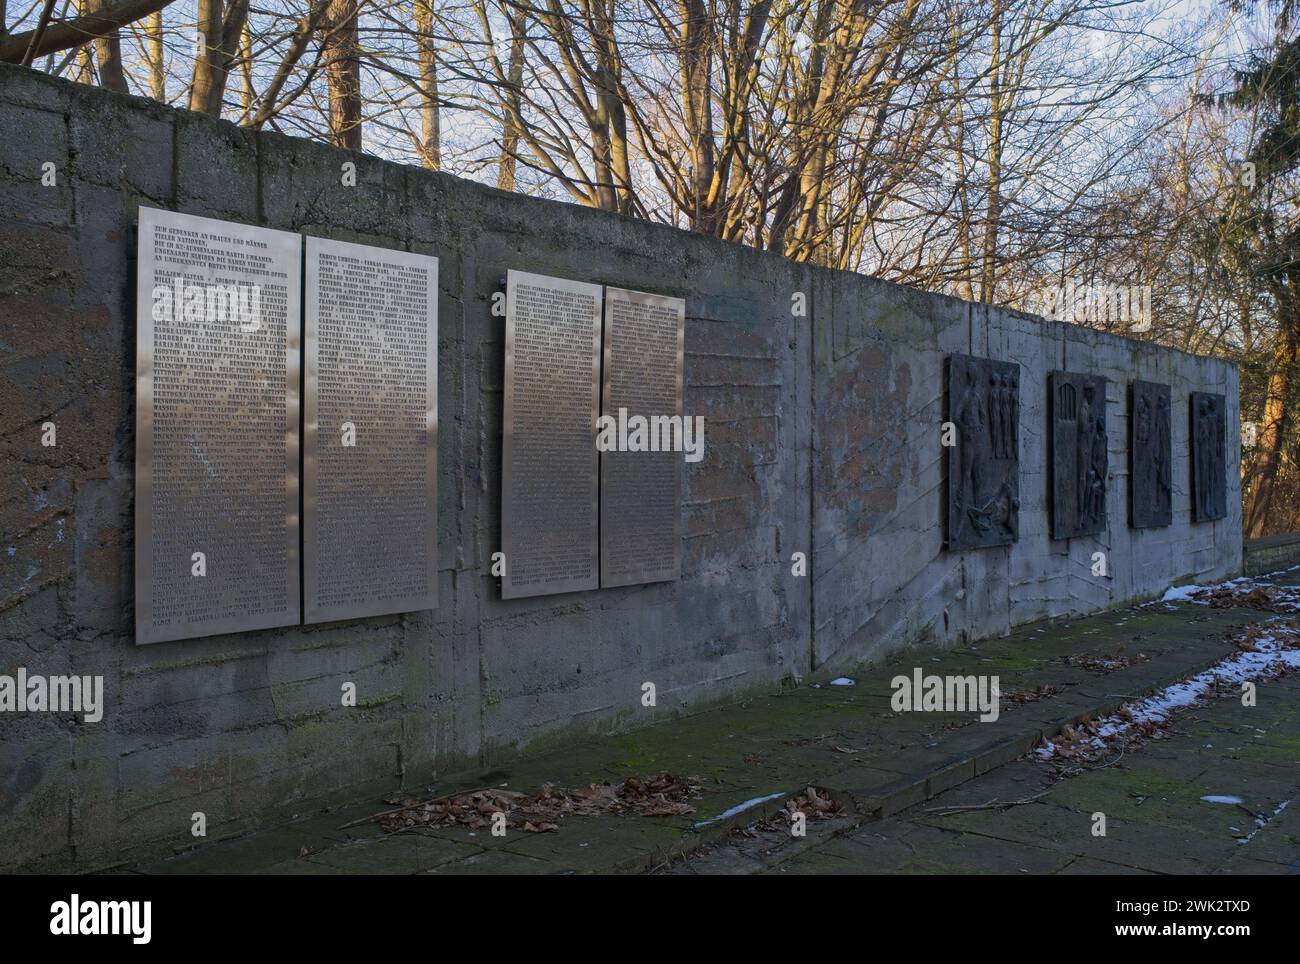 Barth, Germany - Jan 11, 2024: Concentration camp Barth was a sub-camp of concentration camp Ravensbruck during WWII. A total of 7,000 people were imp Stock Photo